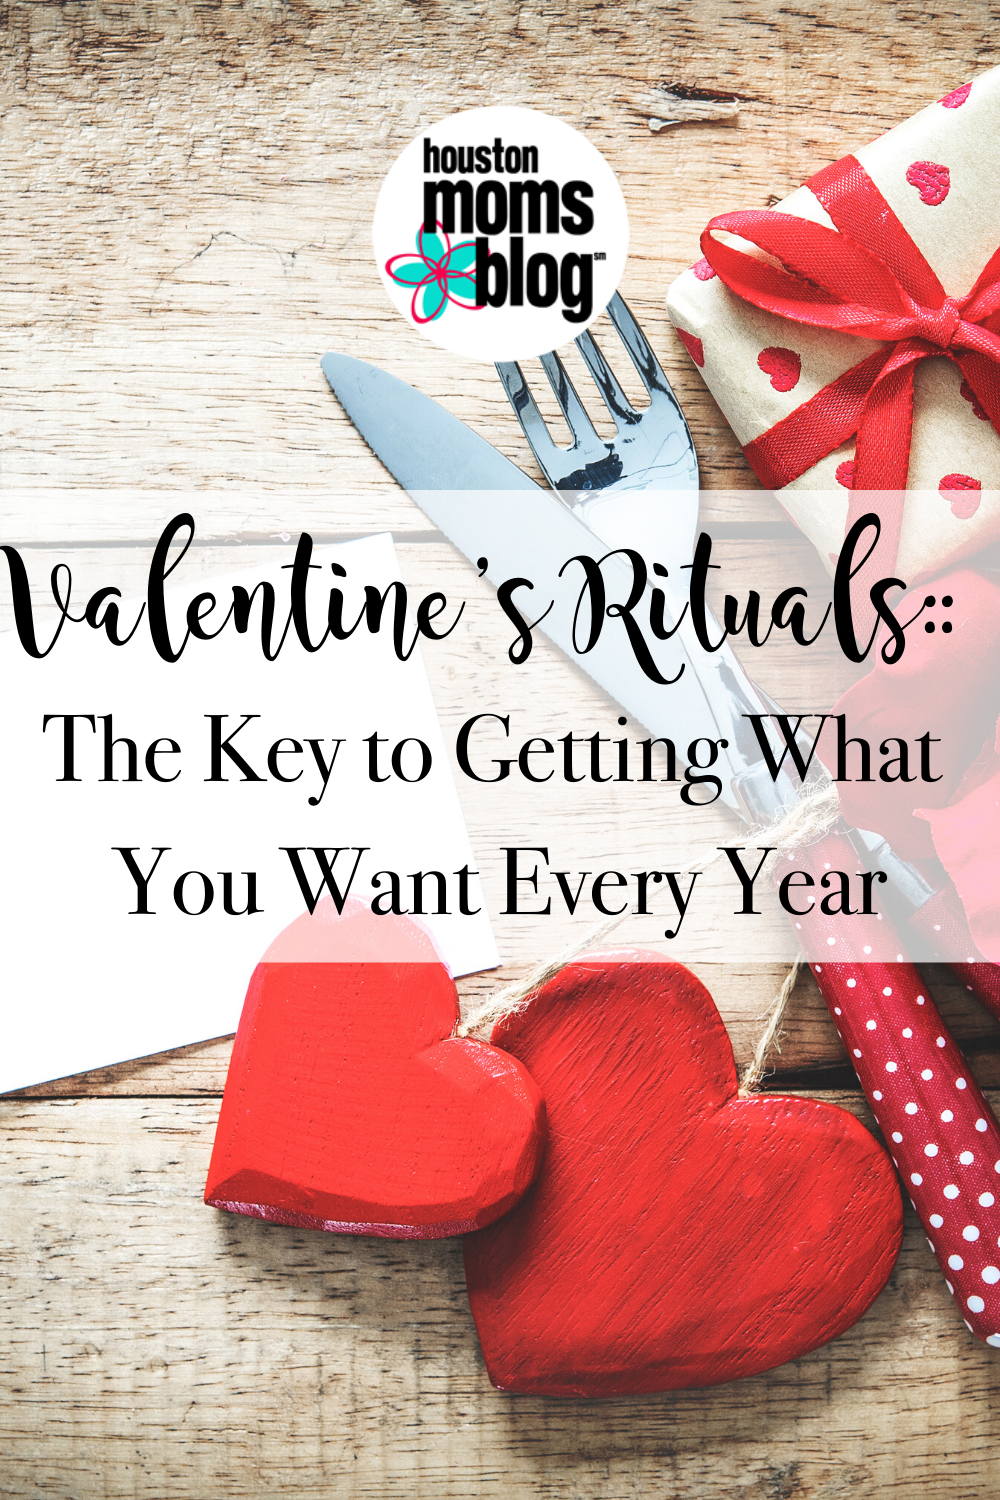 Houston Moms Blog "Valentine's Rituals:: The Key to Getting What You Want Every Year" #houstonmomsblog #momsaroundhouston